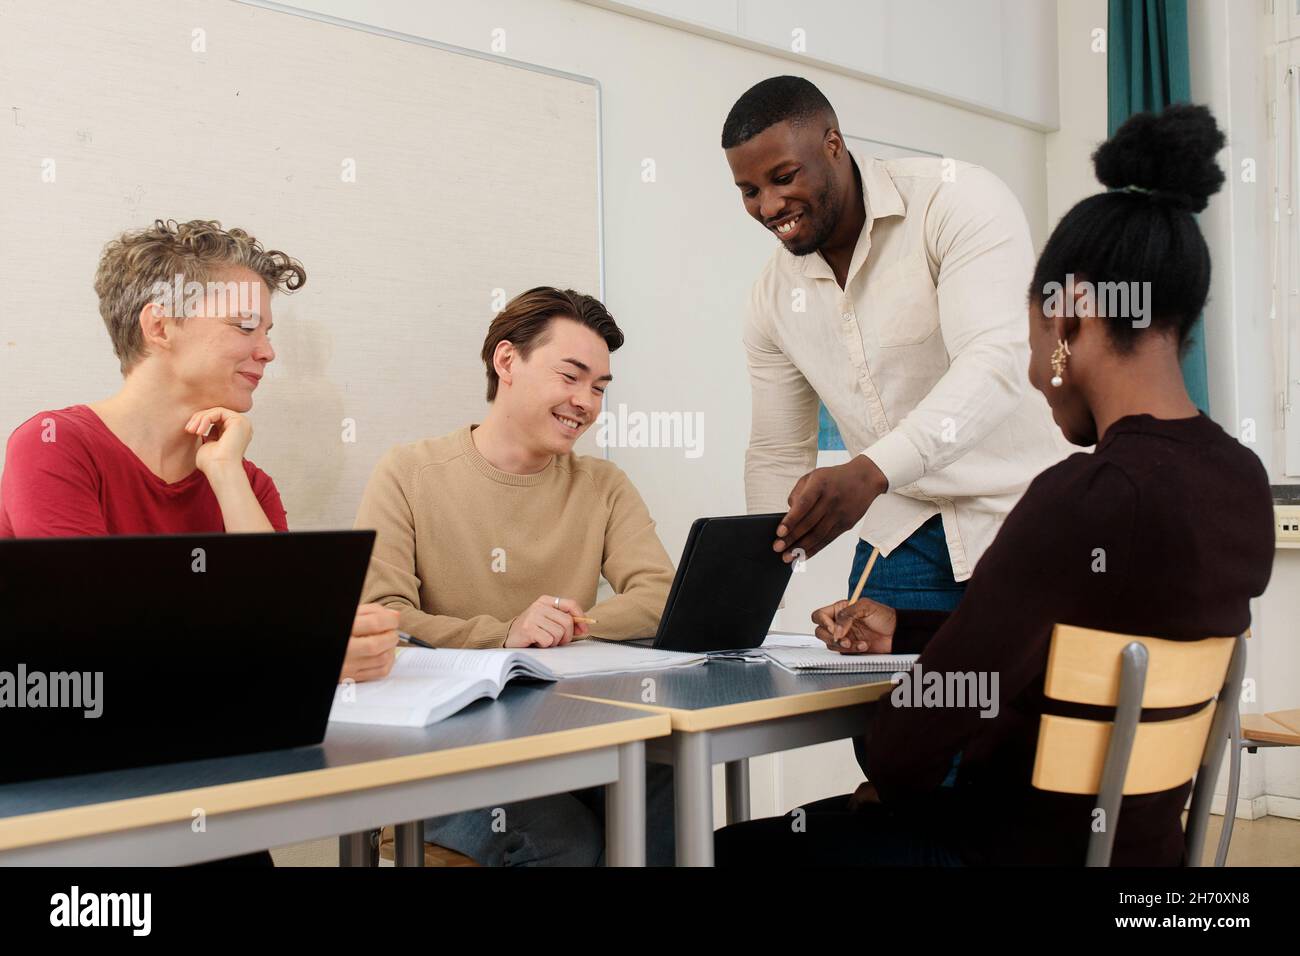 Teacher helping students in classroom Stock Photo